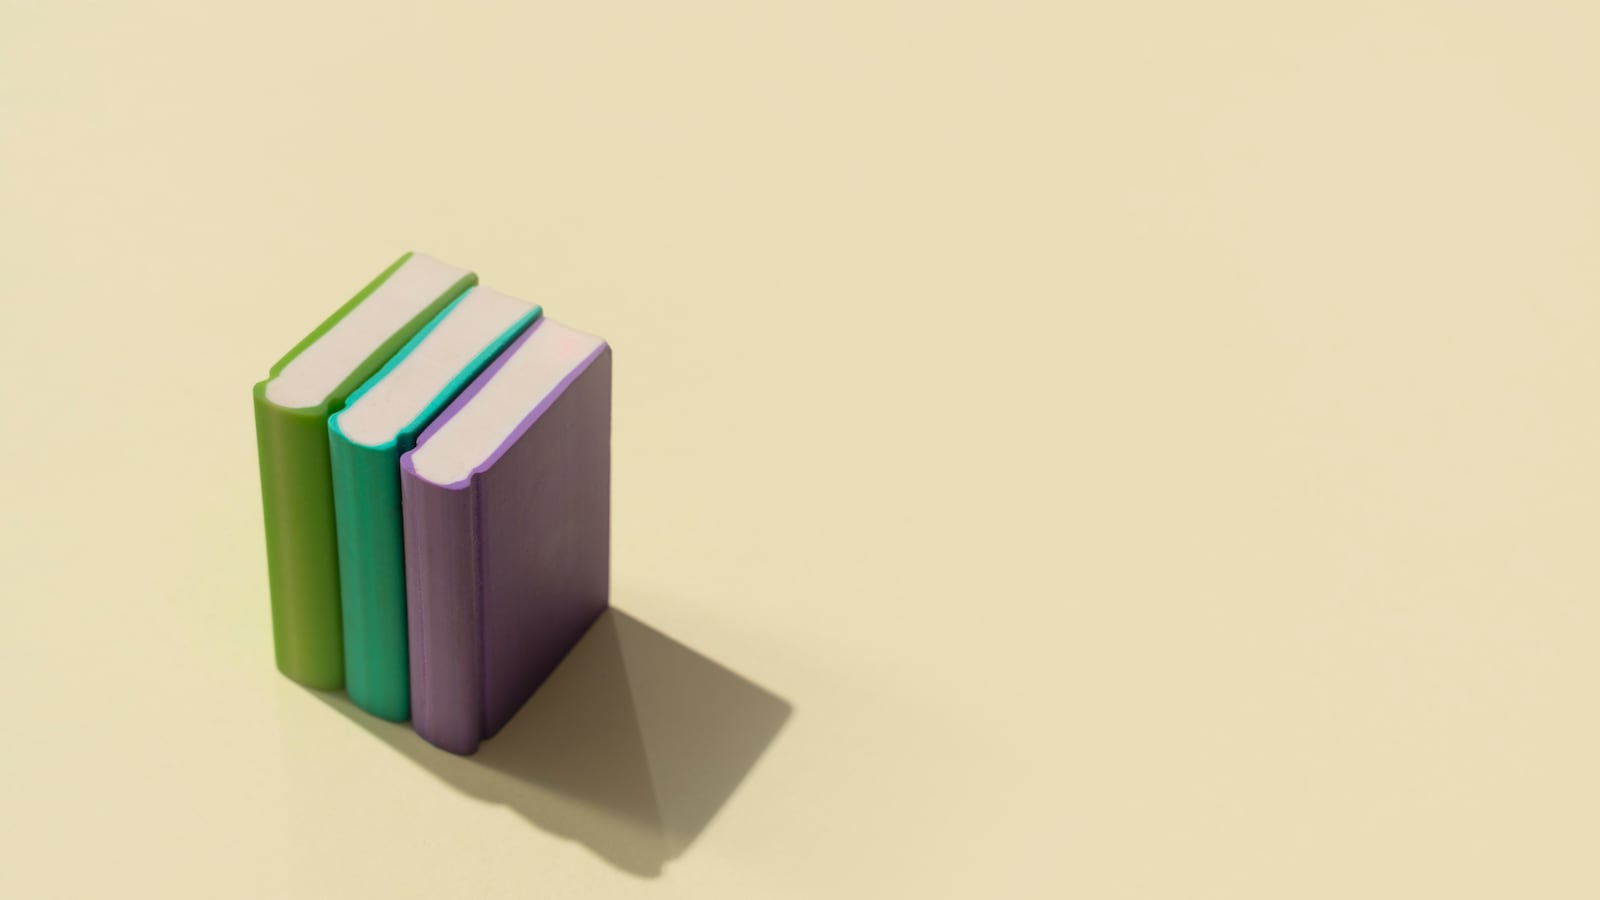 Elevated view of three books on a pastel colored background